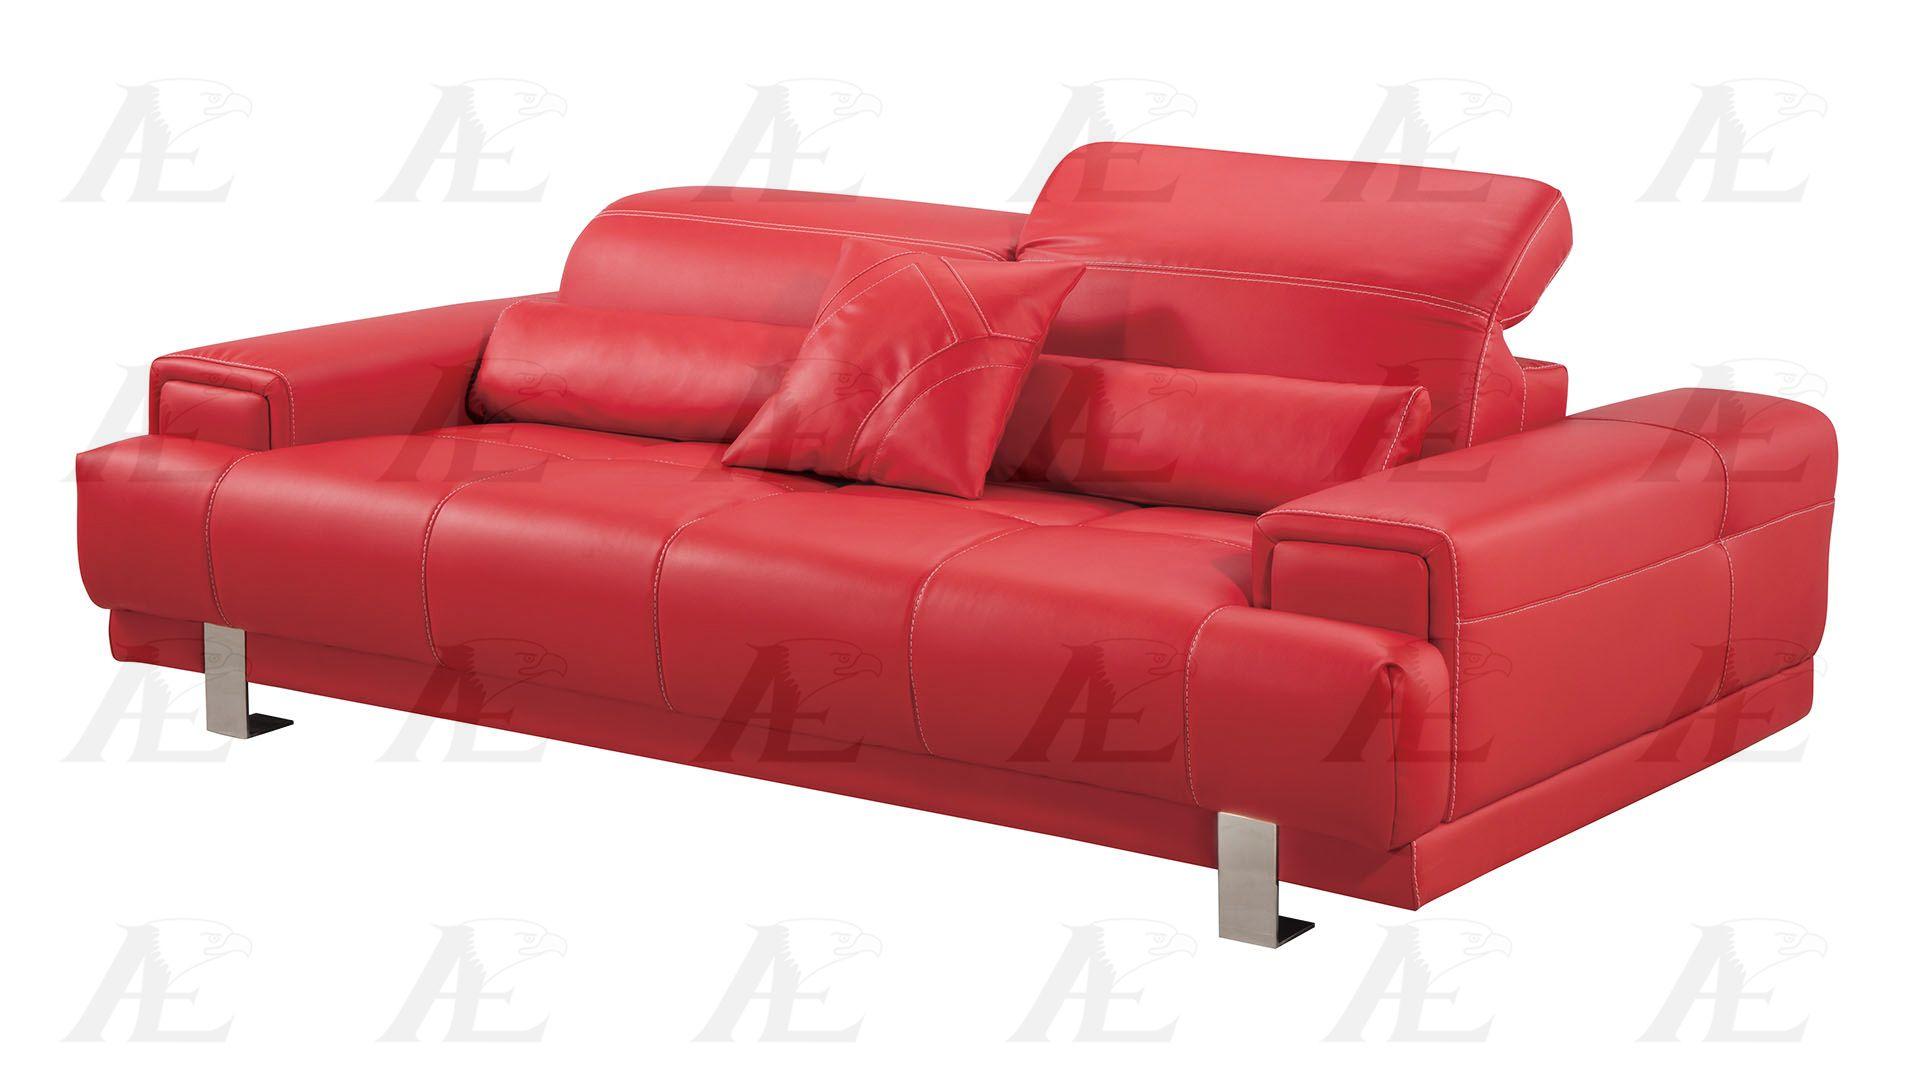 

    
American Eagle Furniture AE606-RED Sofa Loveseat and Chair Set Red AE606-RED-Set-4
